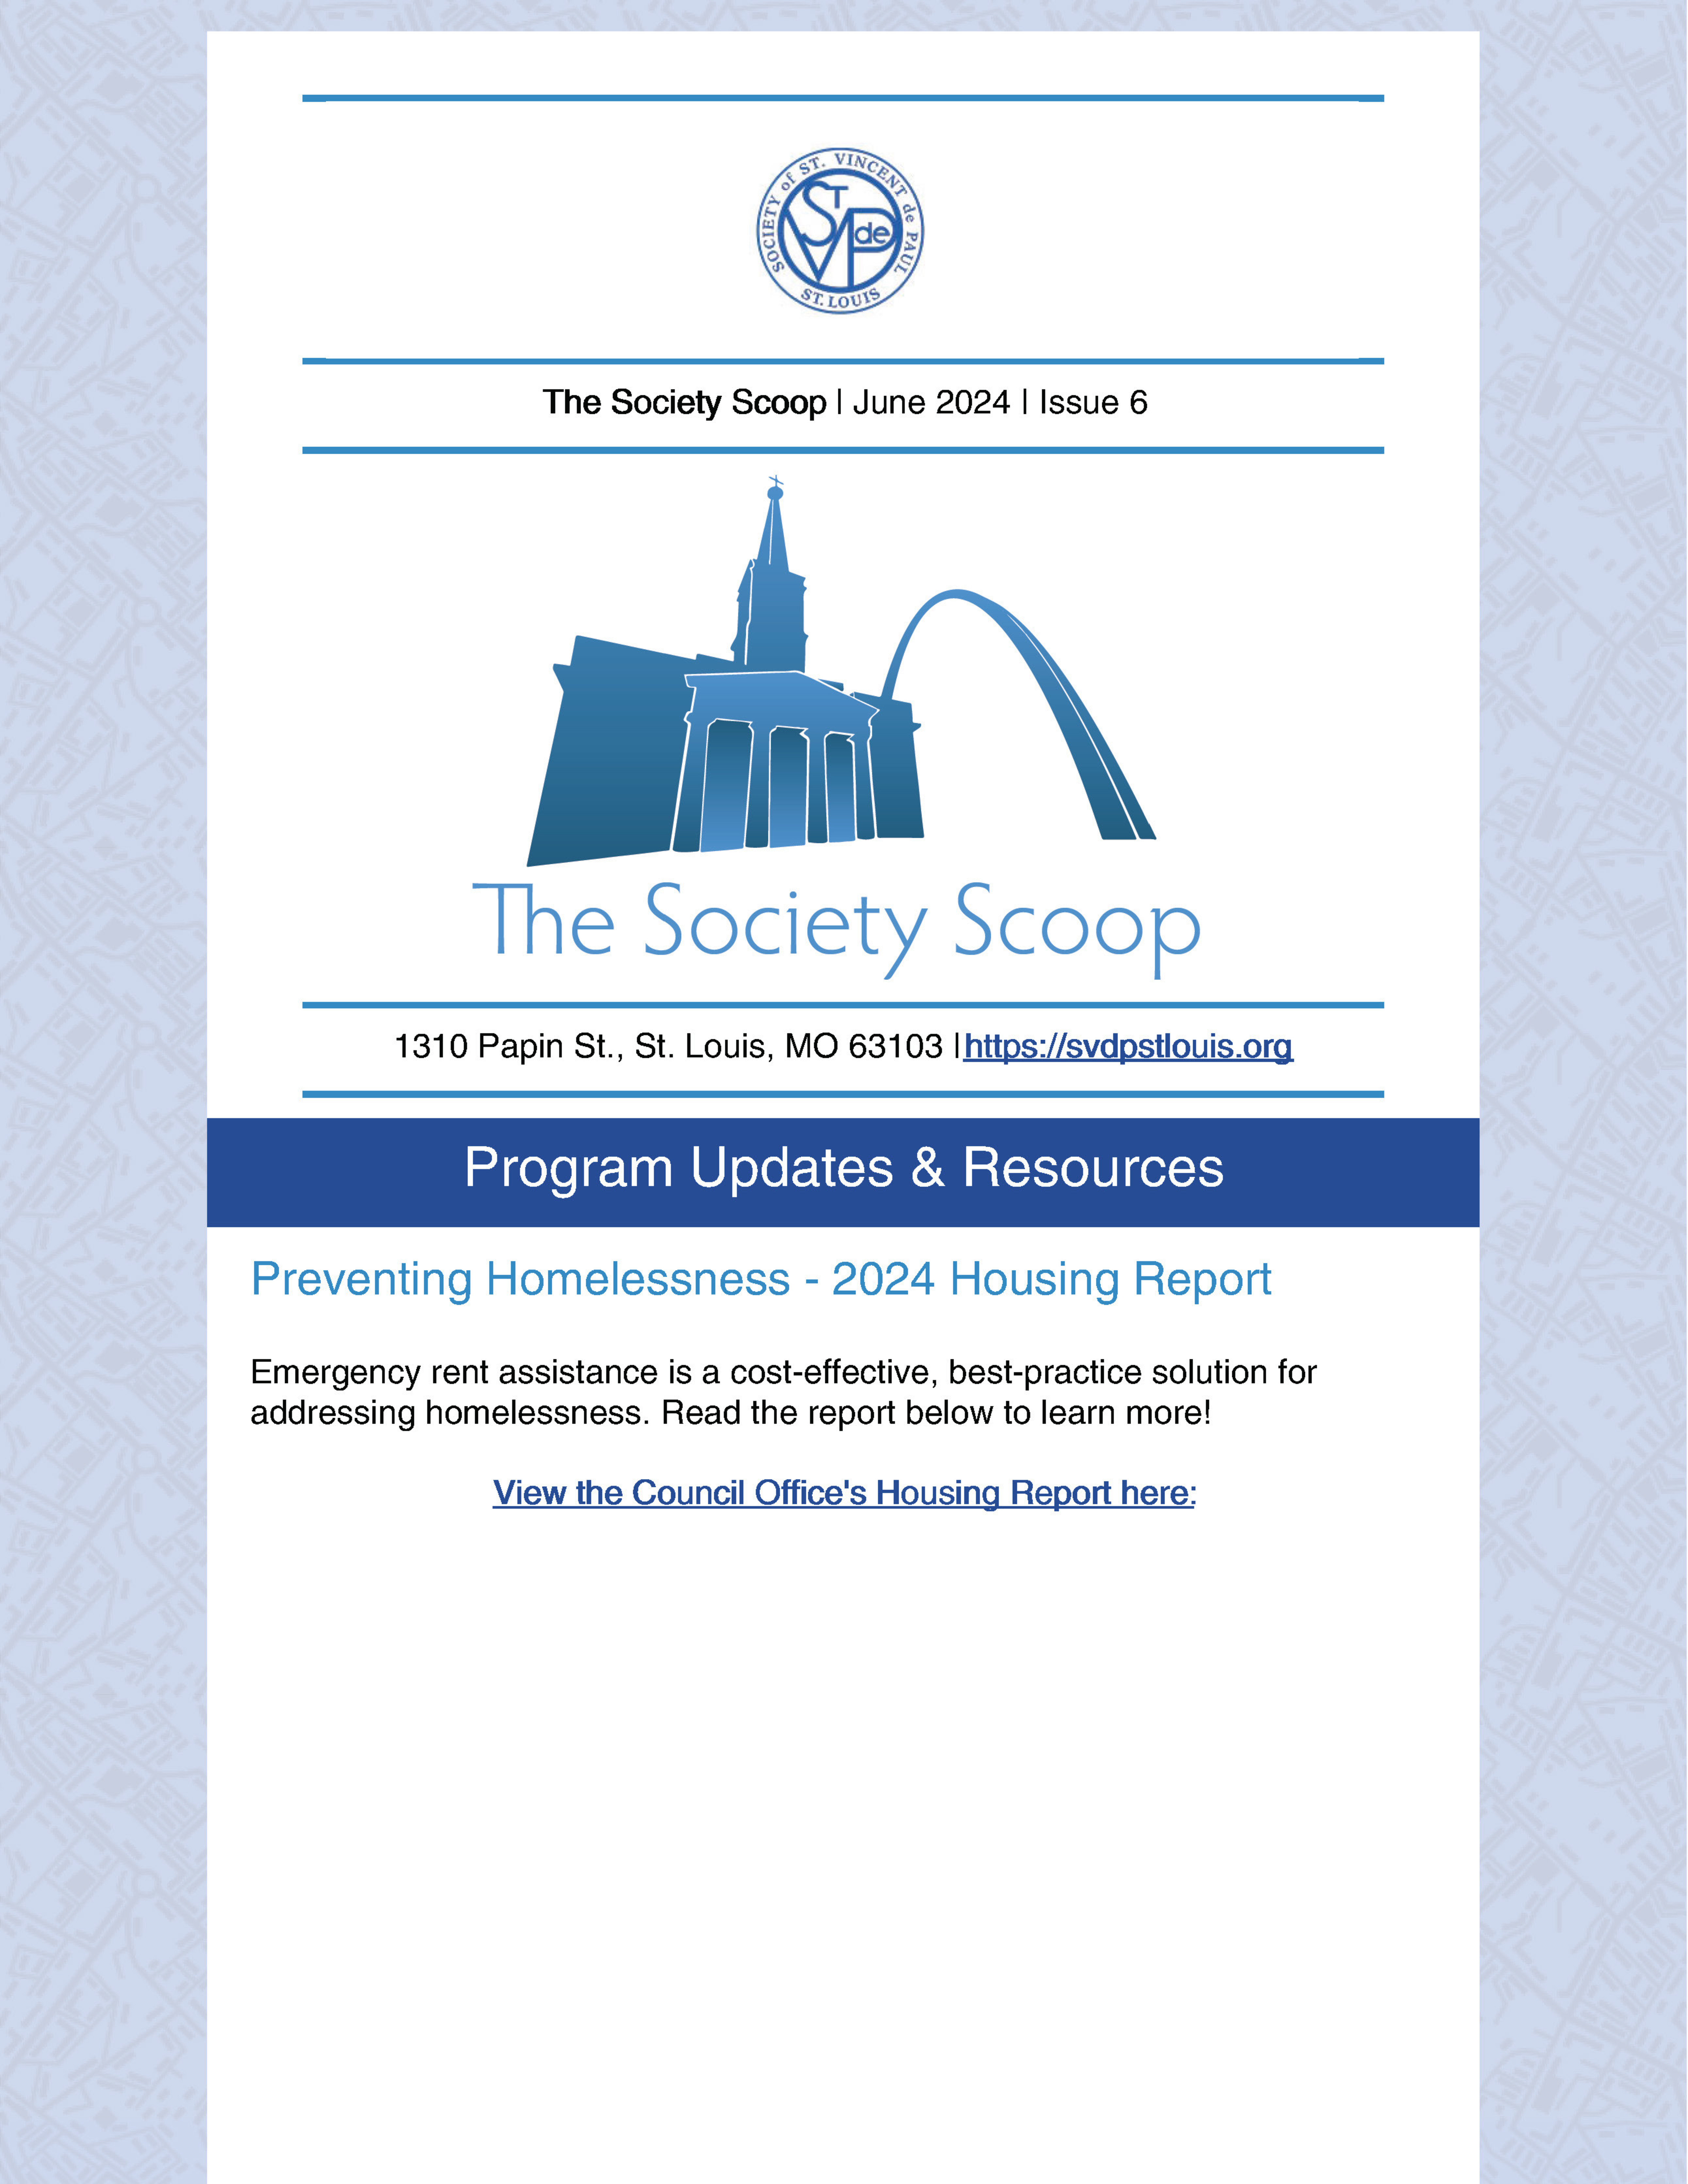 The Society Scoop June 2024 Cover Page